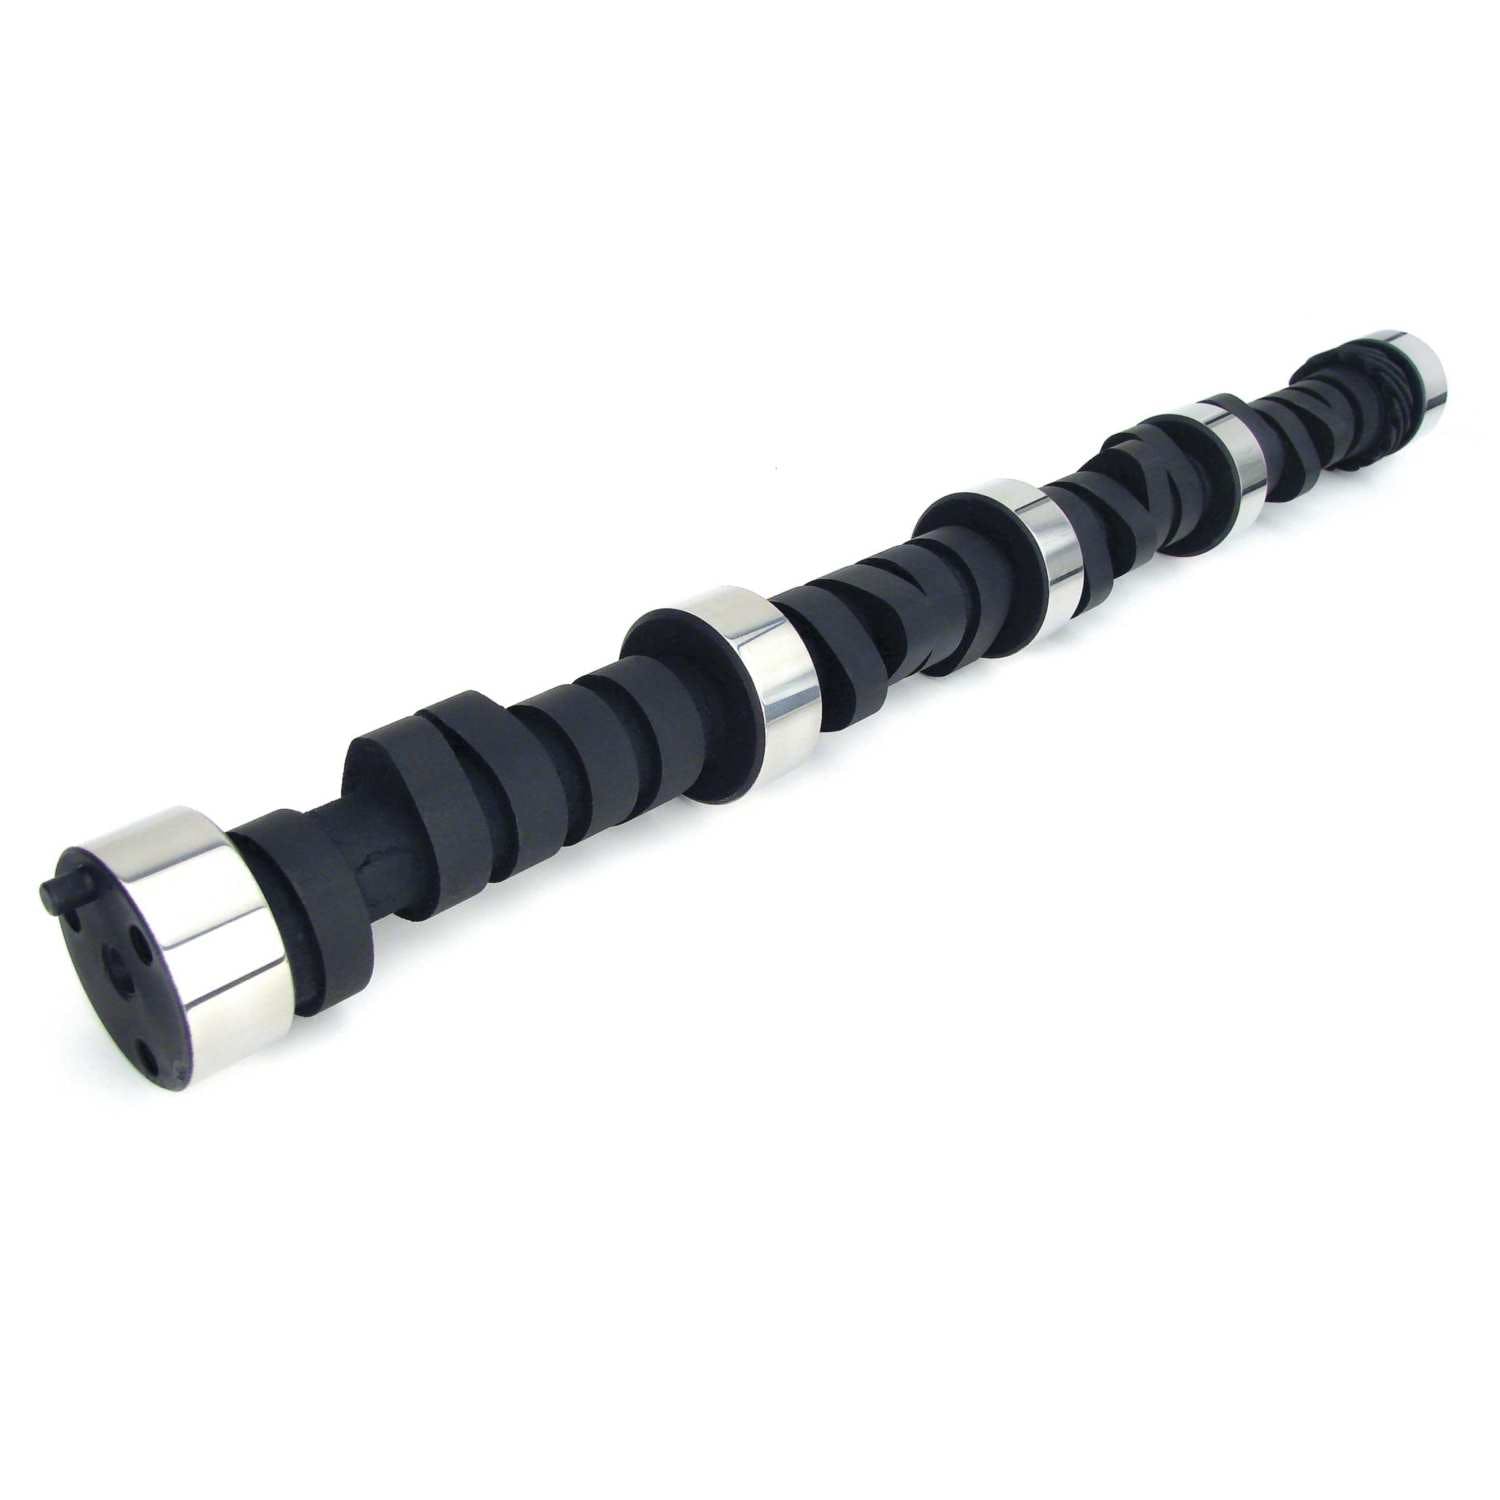 Competition Cams 11-606-5 Drag Race Camshaft